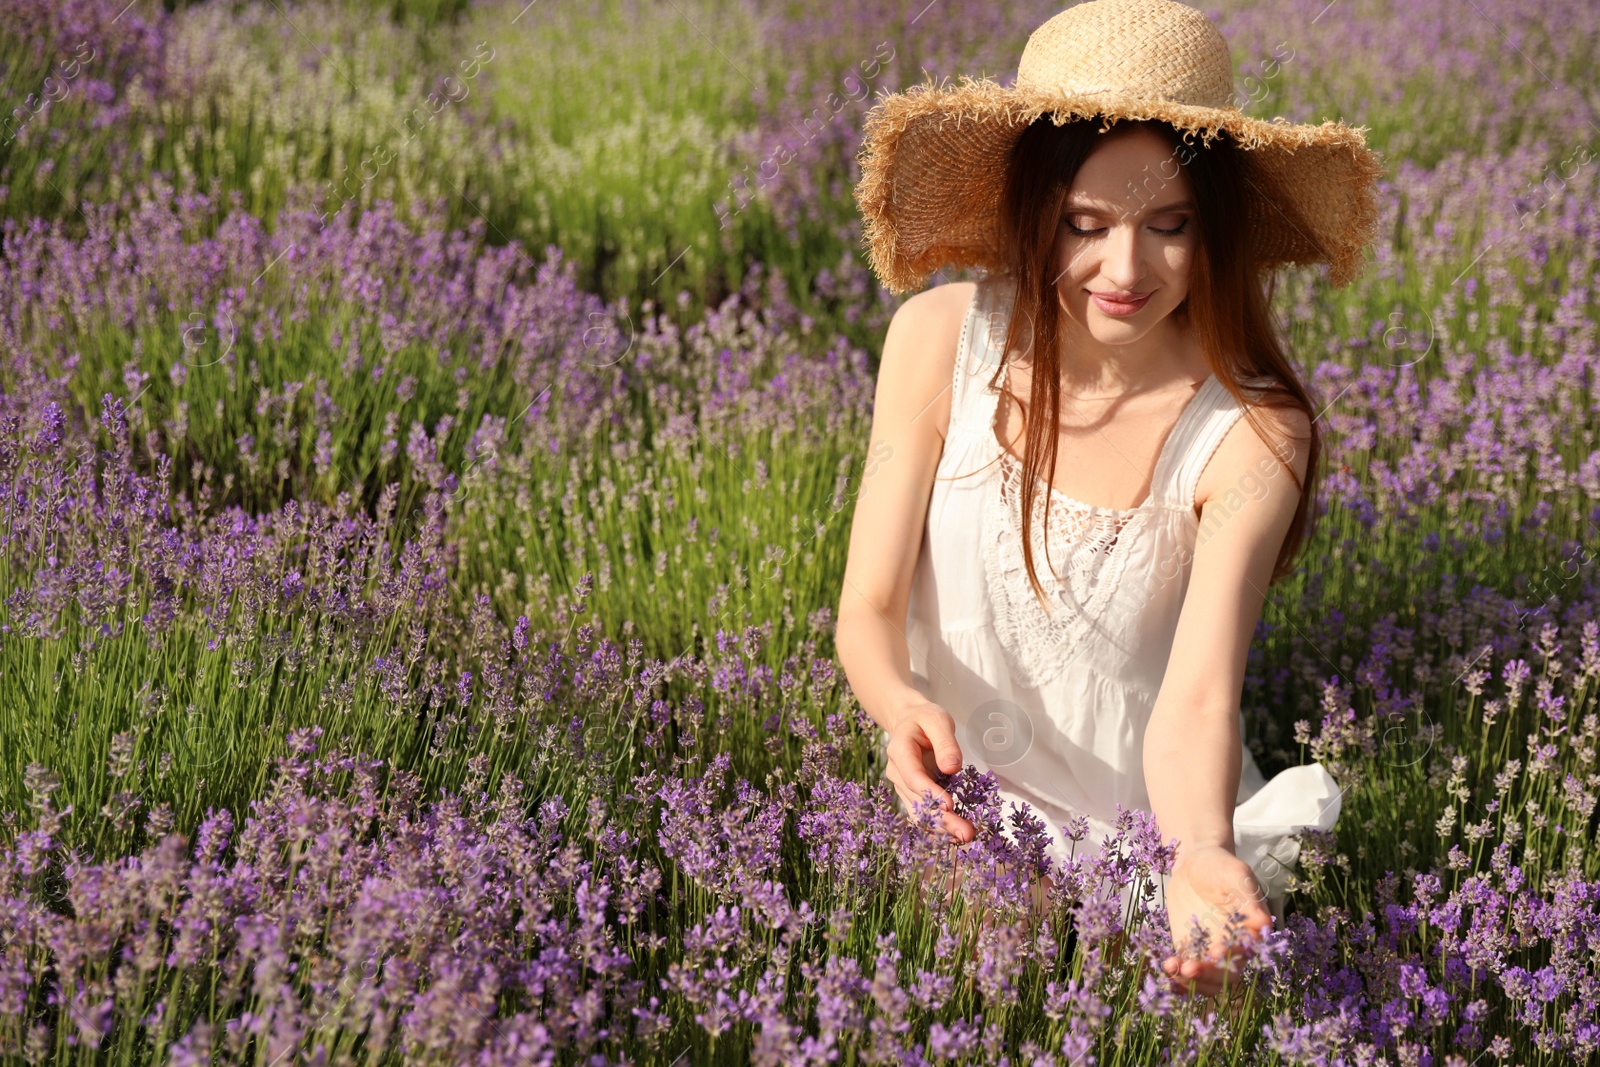 Photo of Young woman in lavender field on summer day